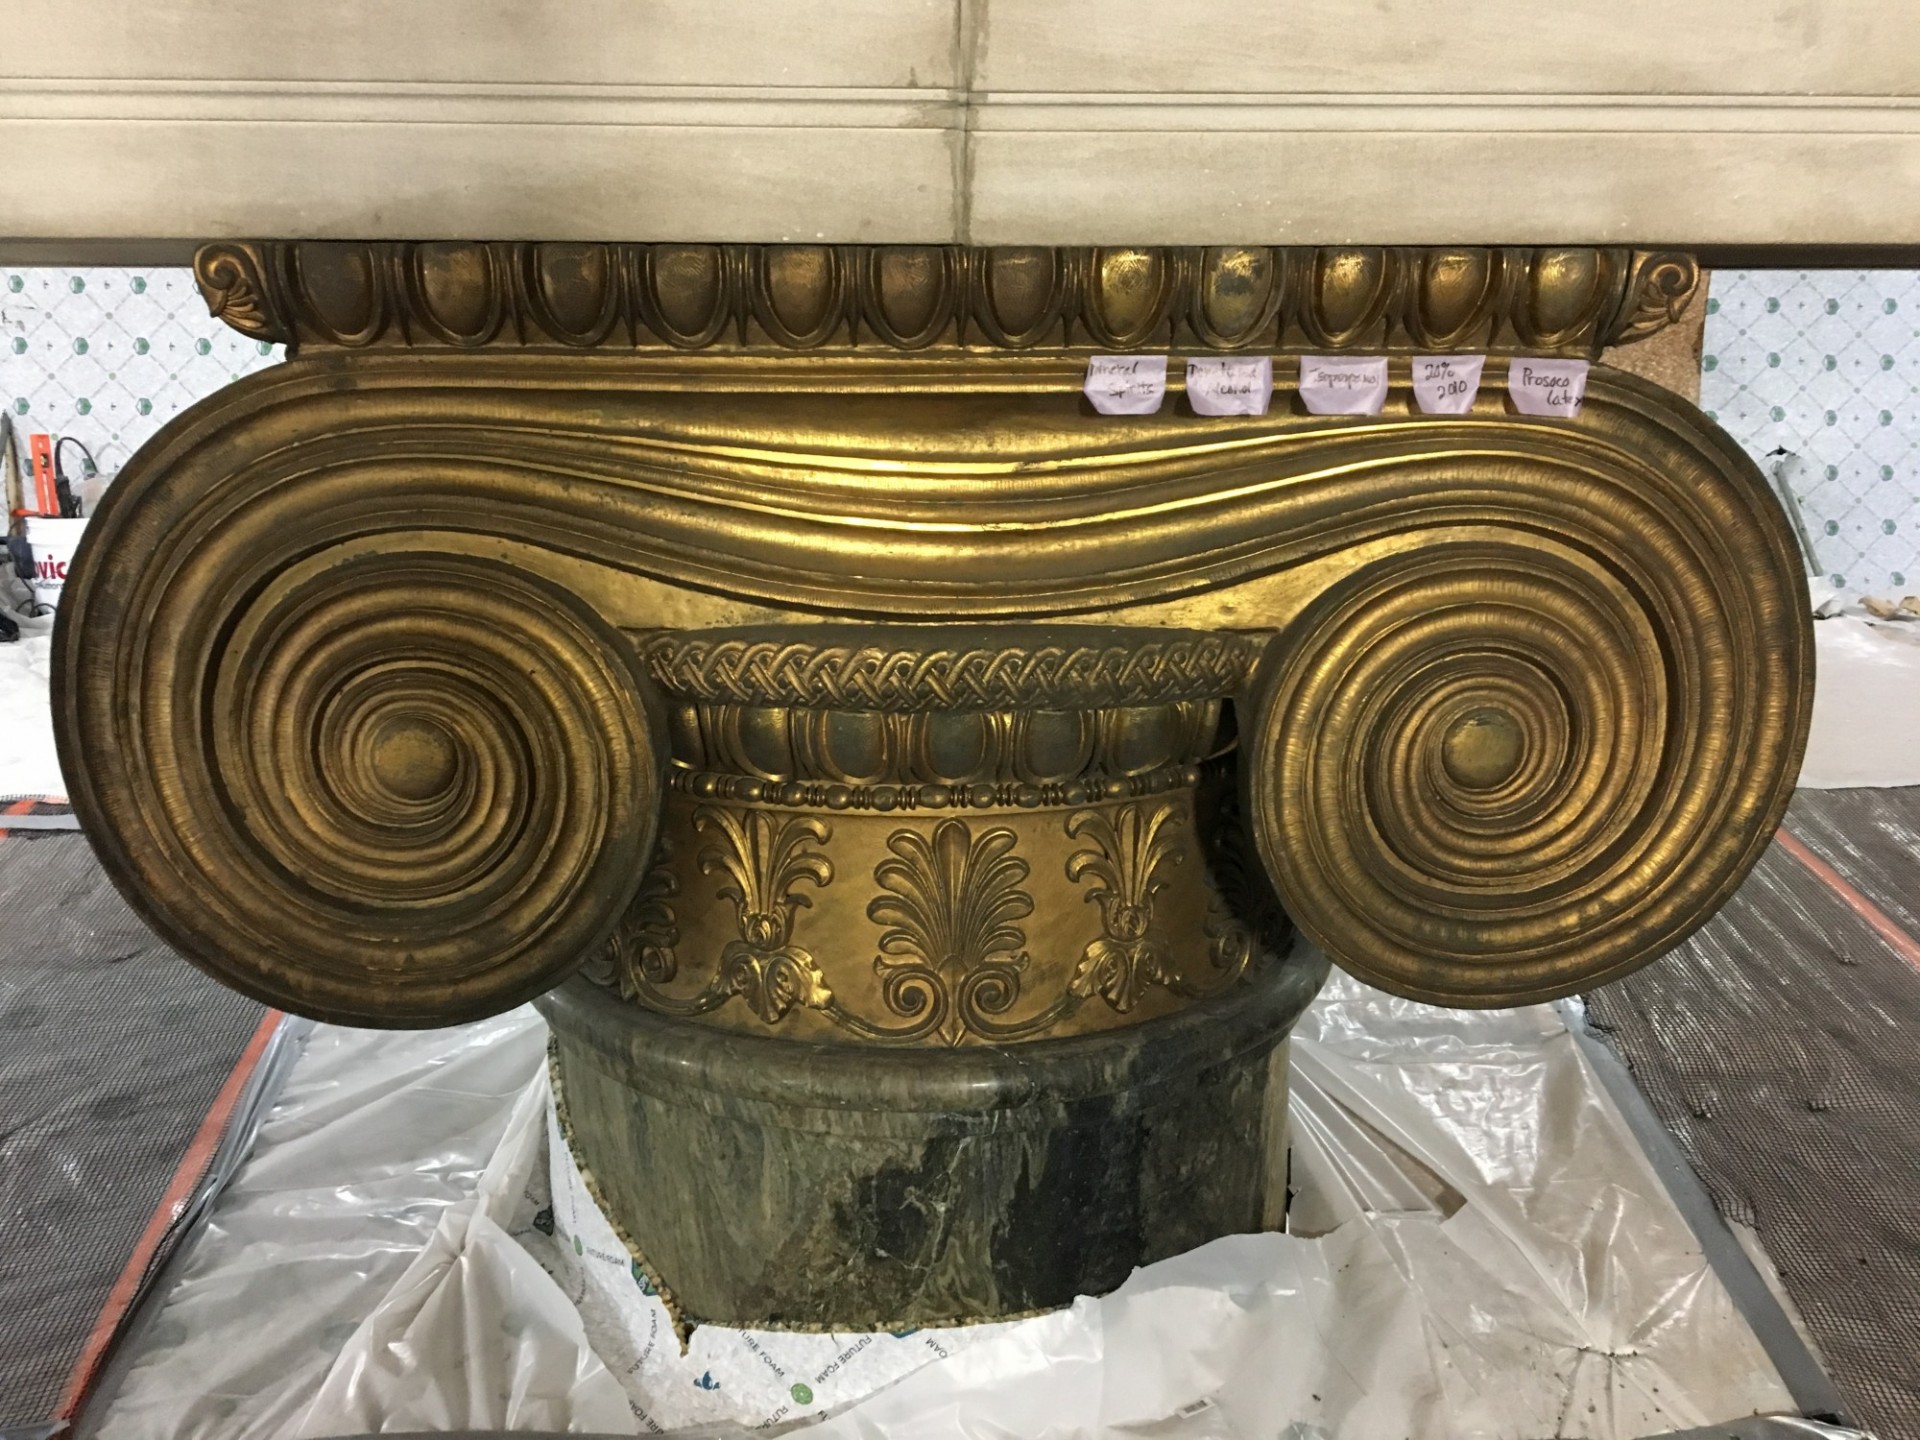 A gilded bronze column capital with tape labels marking sections.